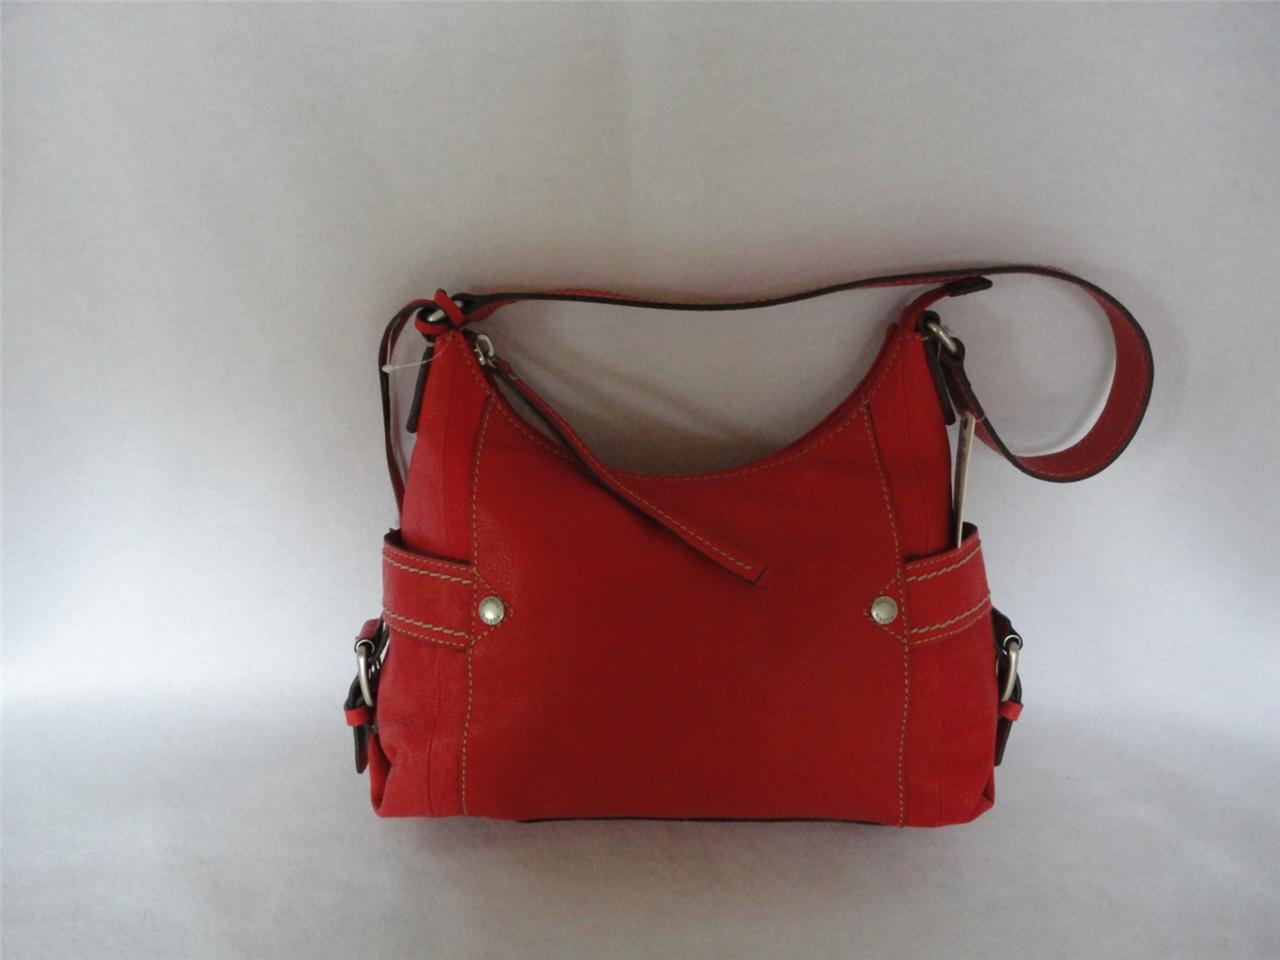 FOSSIL Red Leather Hayley LARGE Hobo Handbag Bag - NEW WITH TAGS | eBay